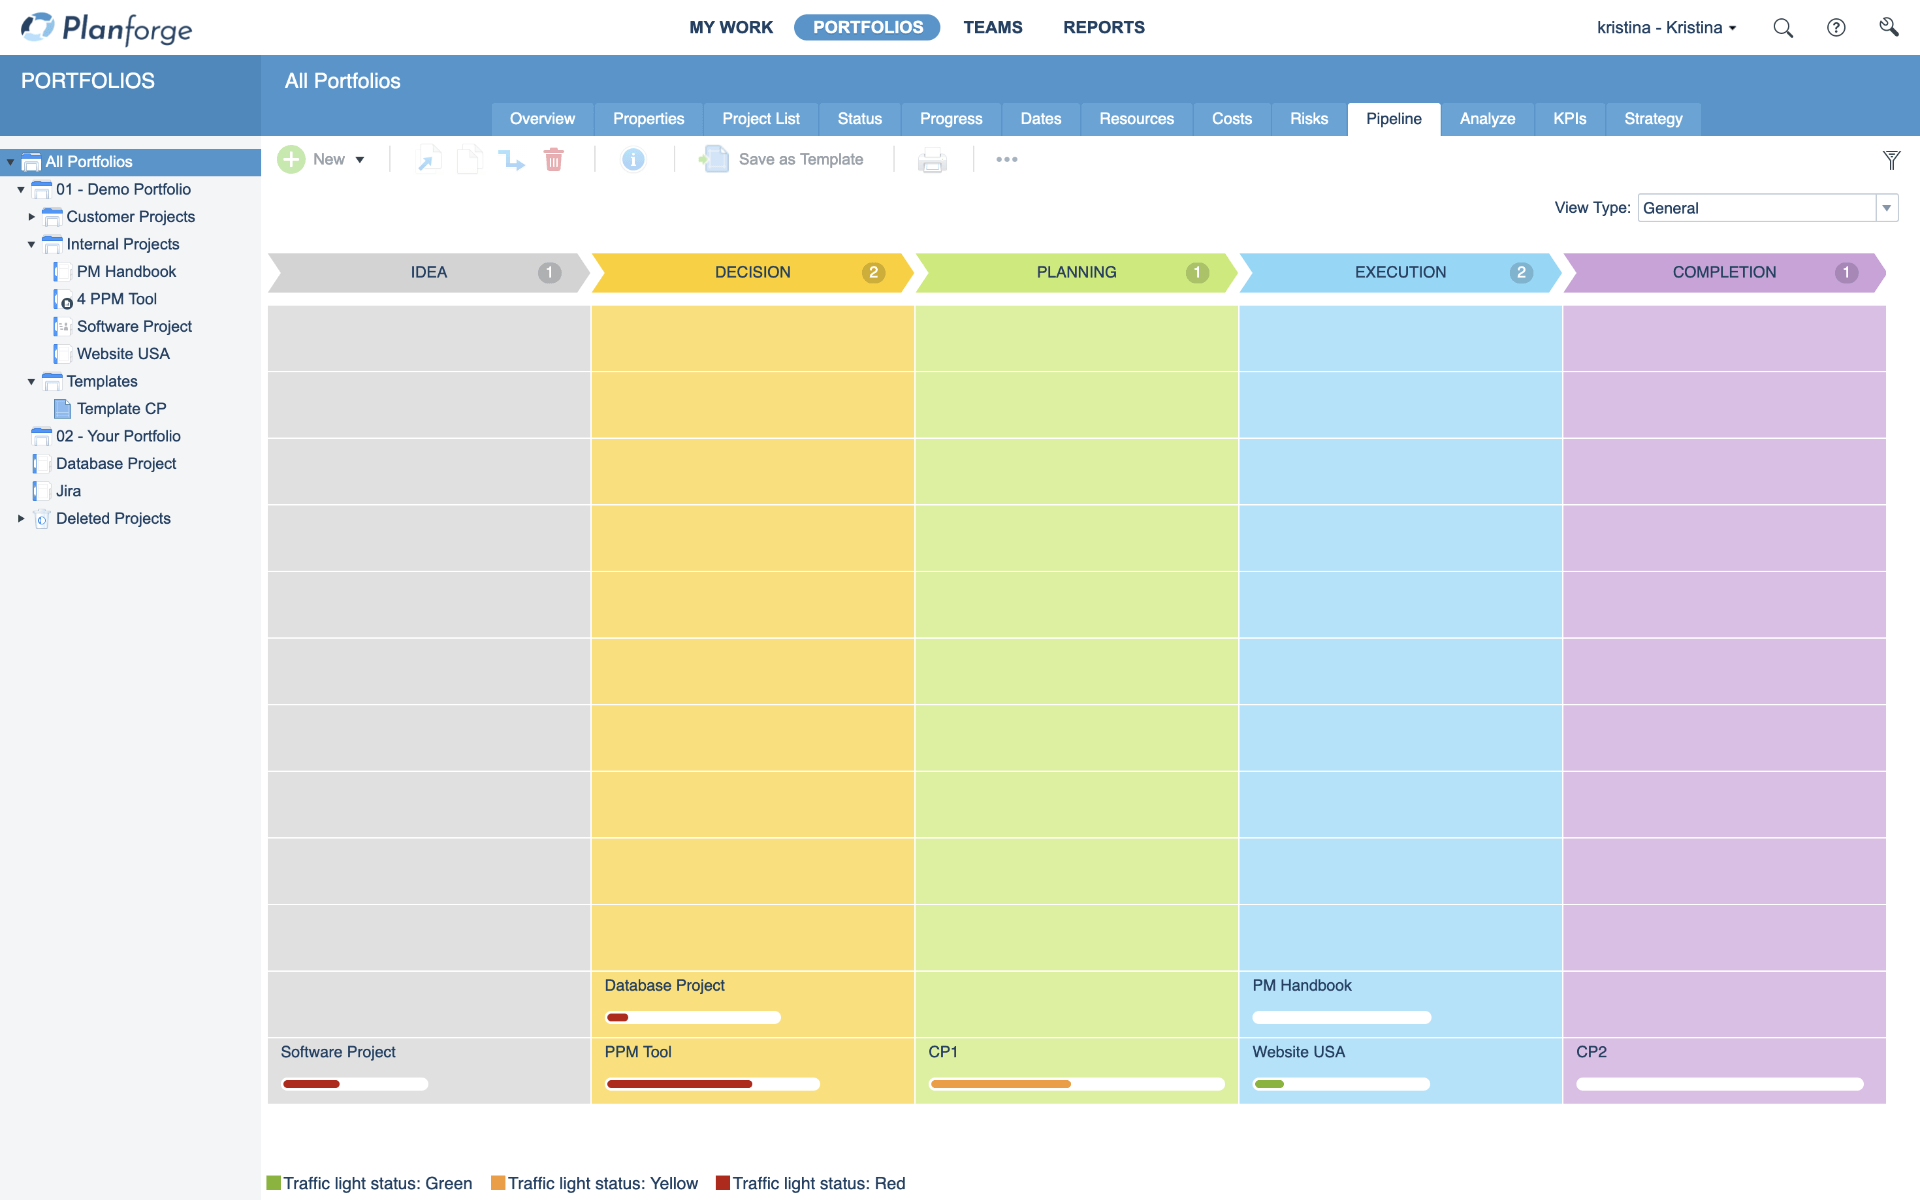 Project-Planning-with-Jira-Pipeline-Software-by-Planforge